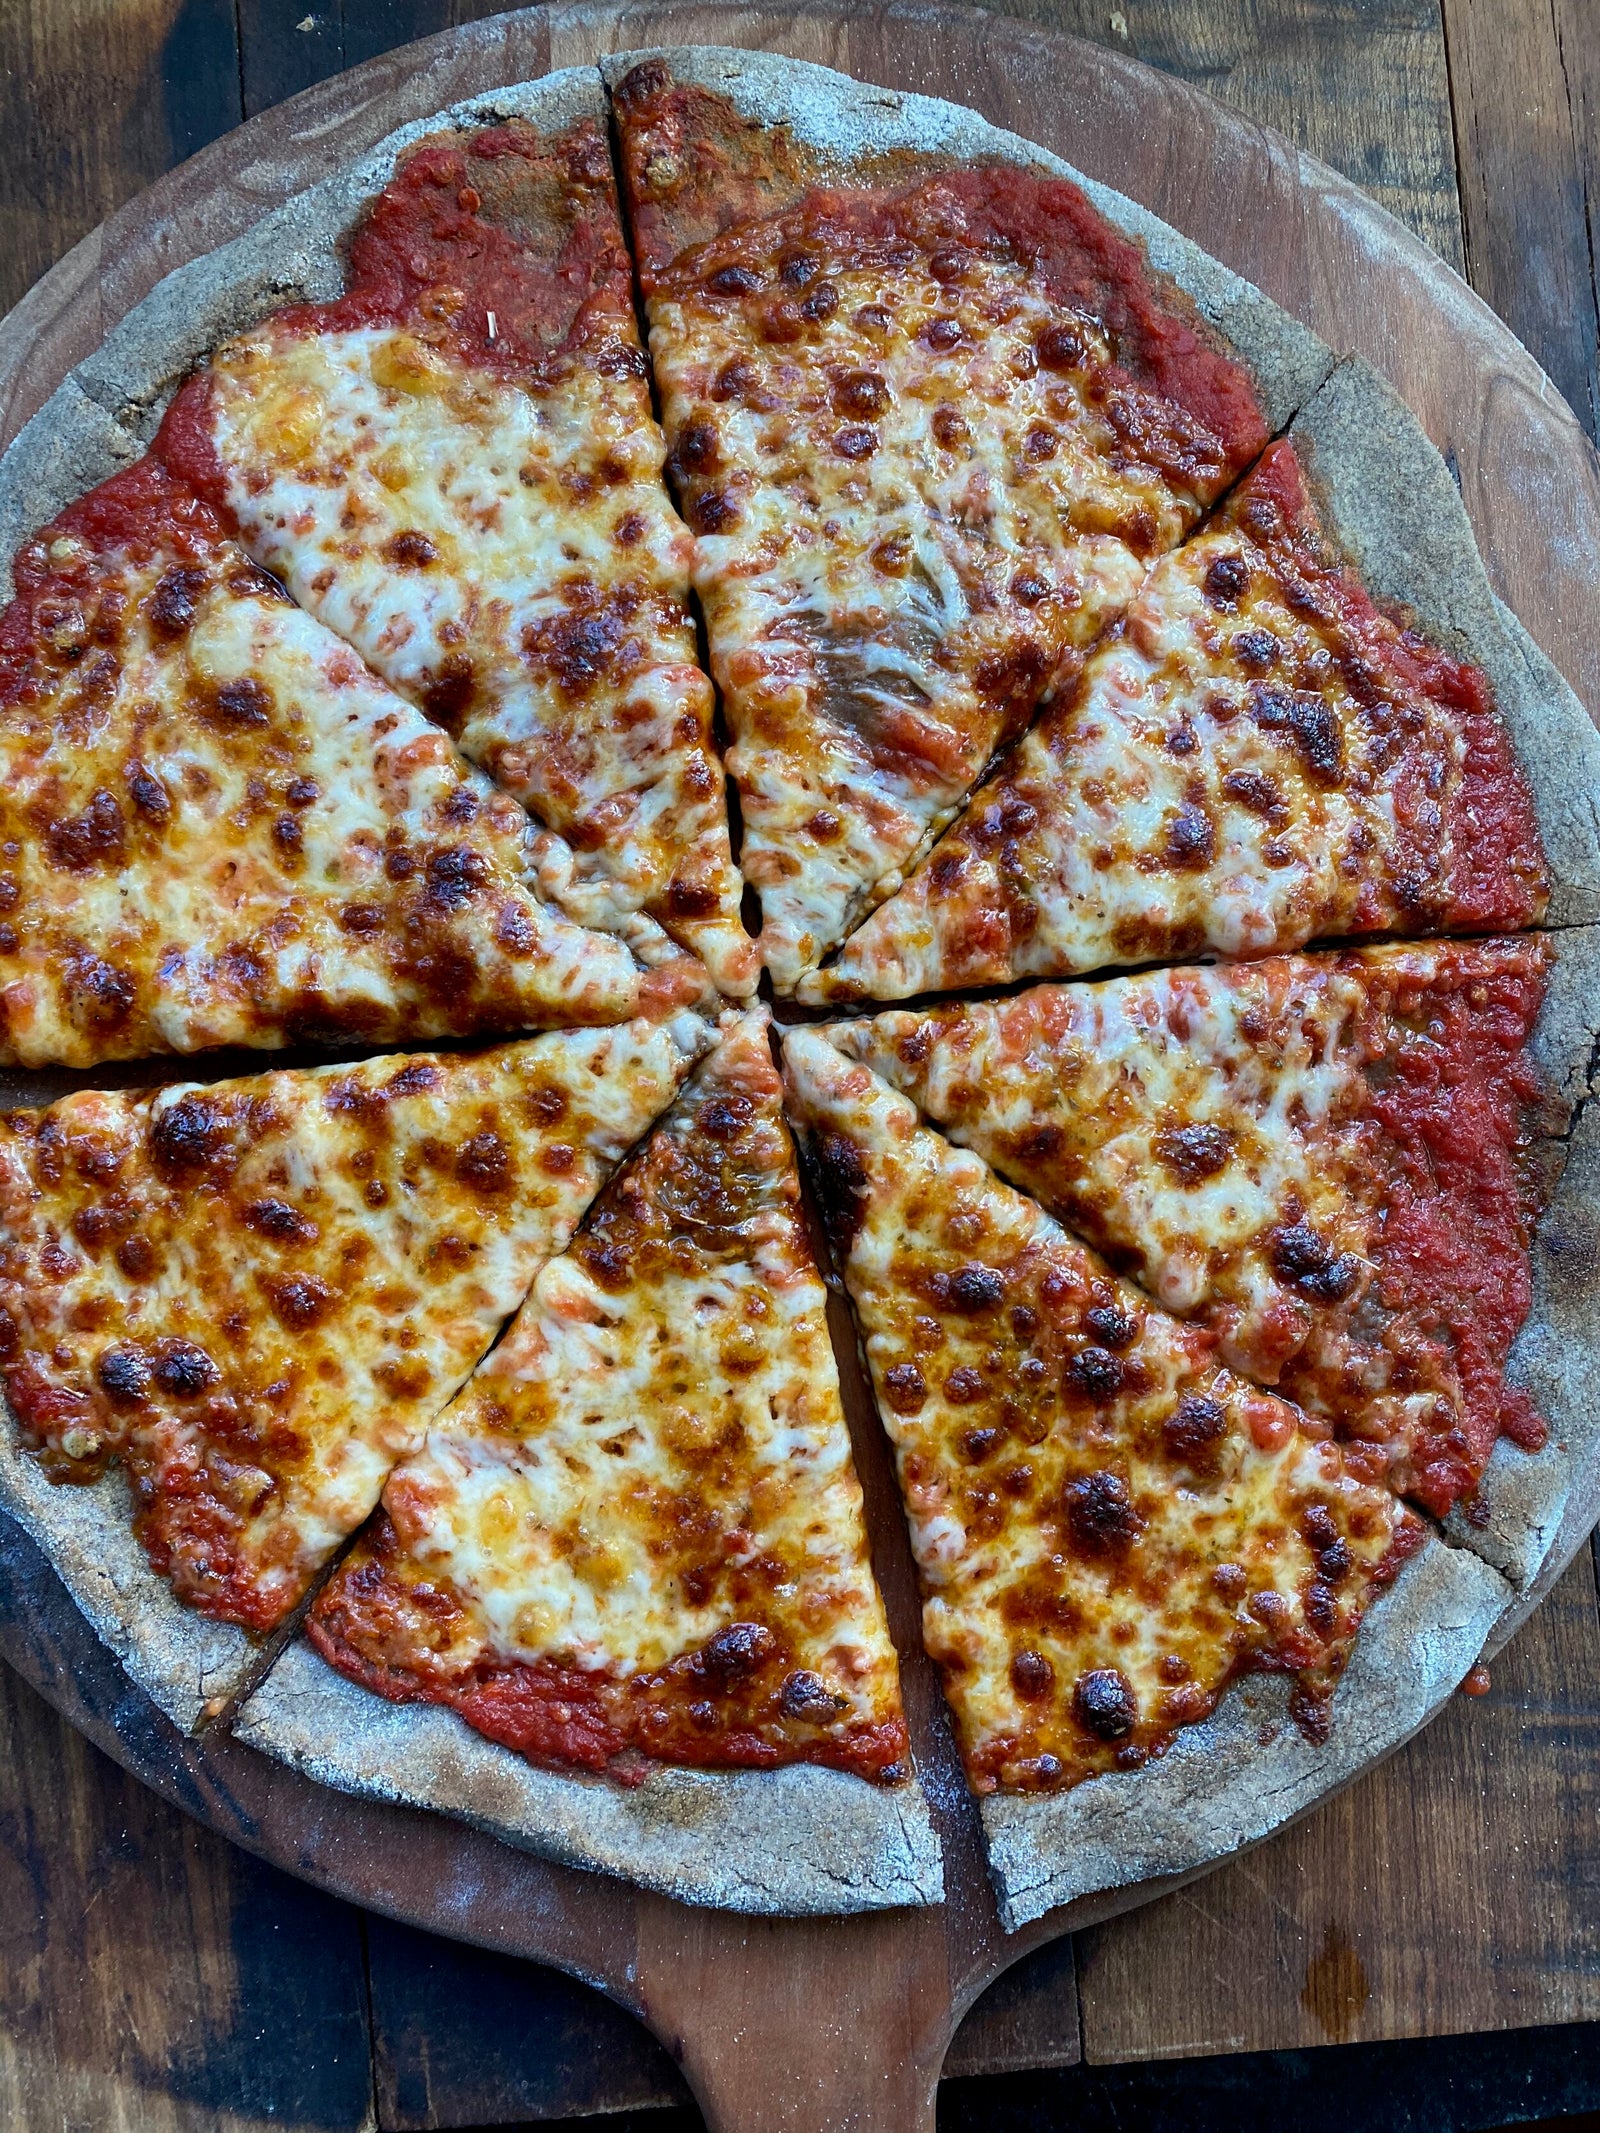 Cheese and tomato pizza with gluten-free crust 